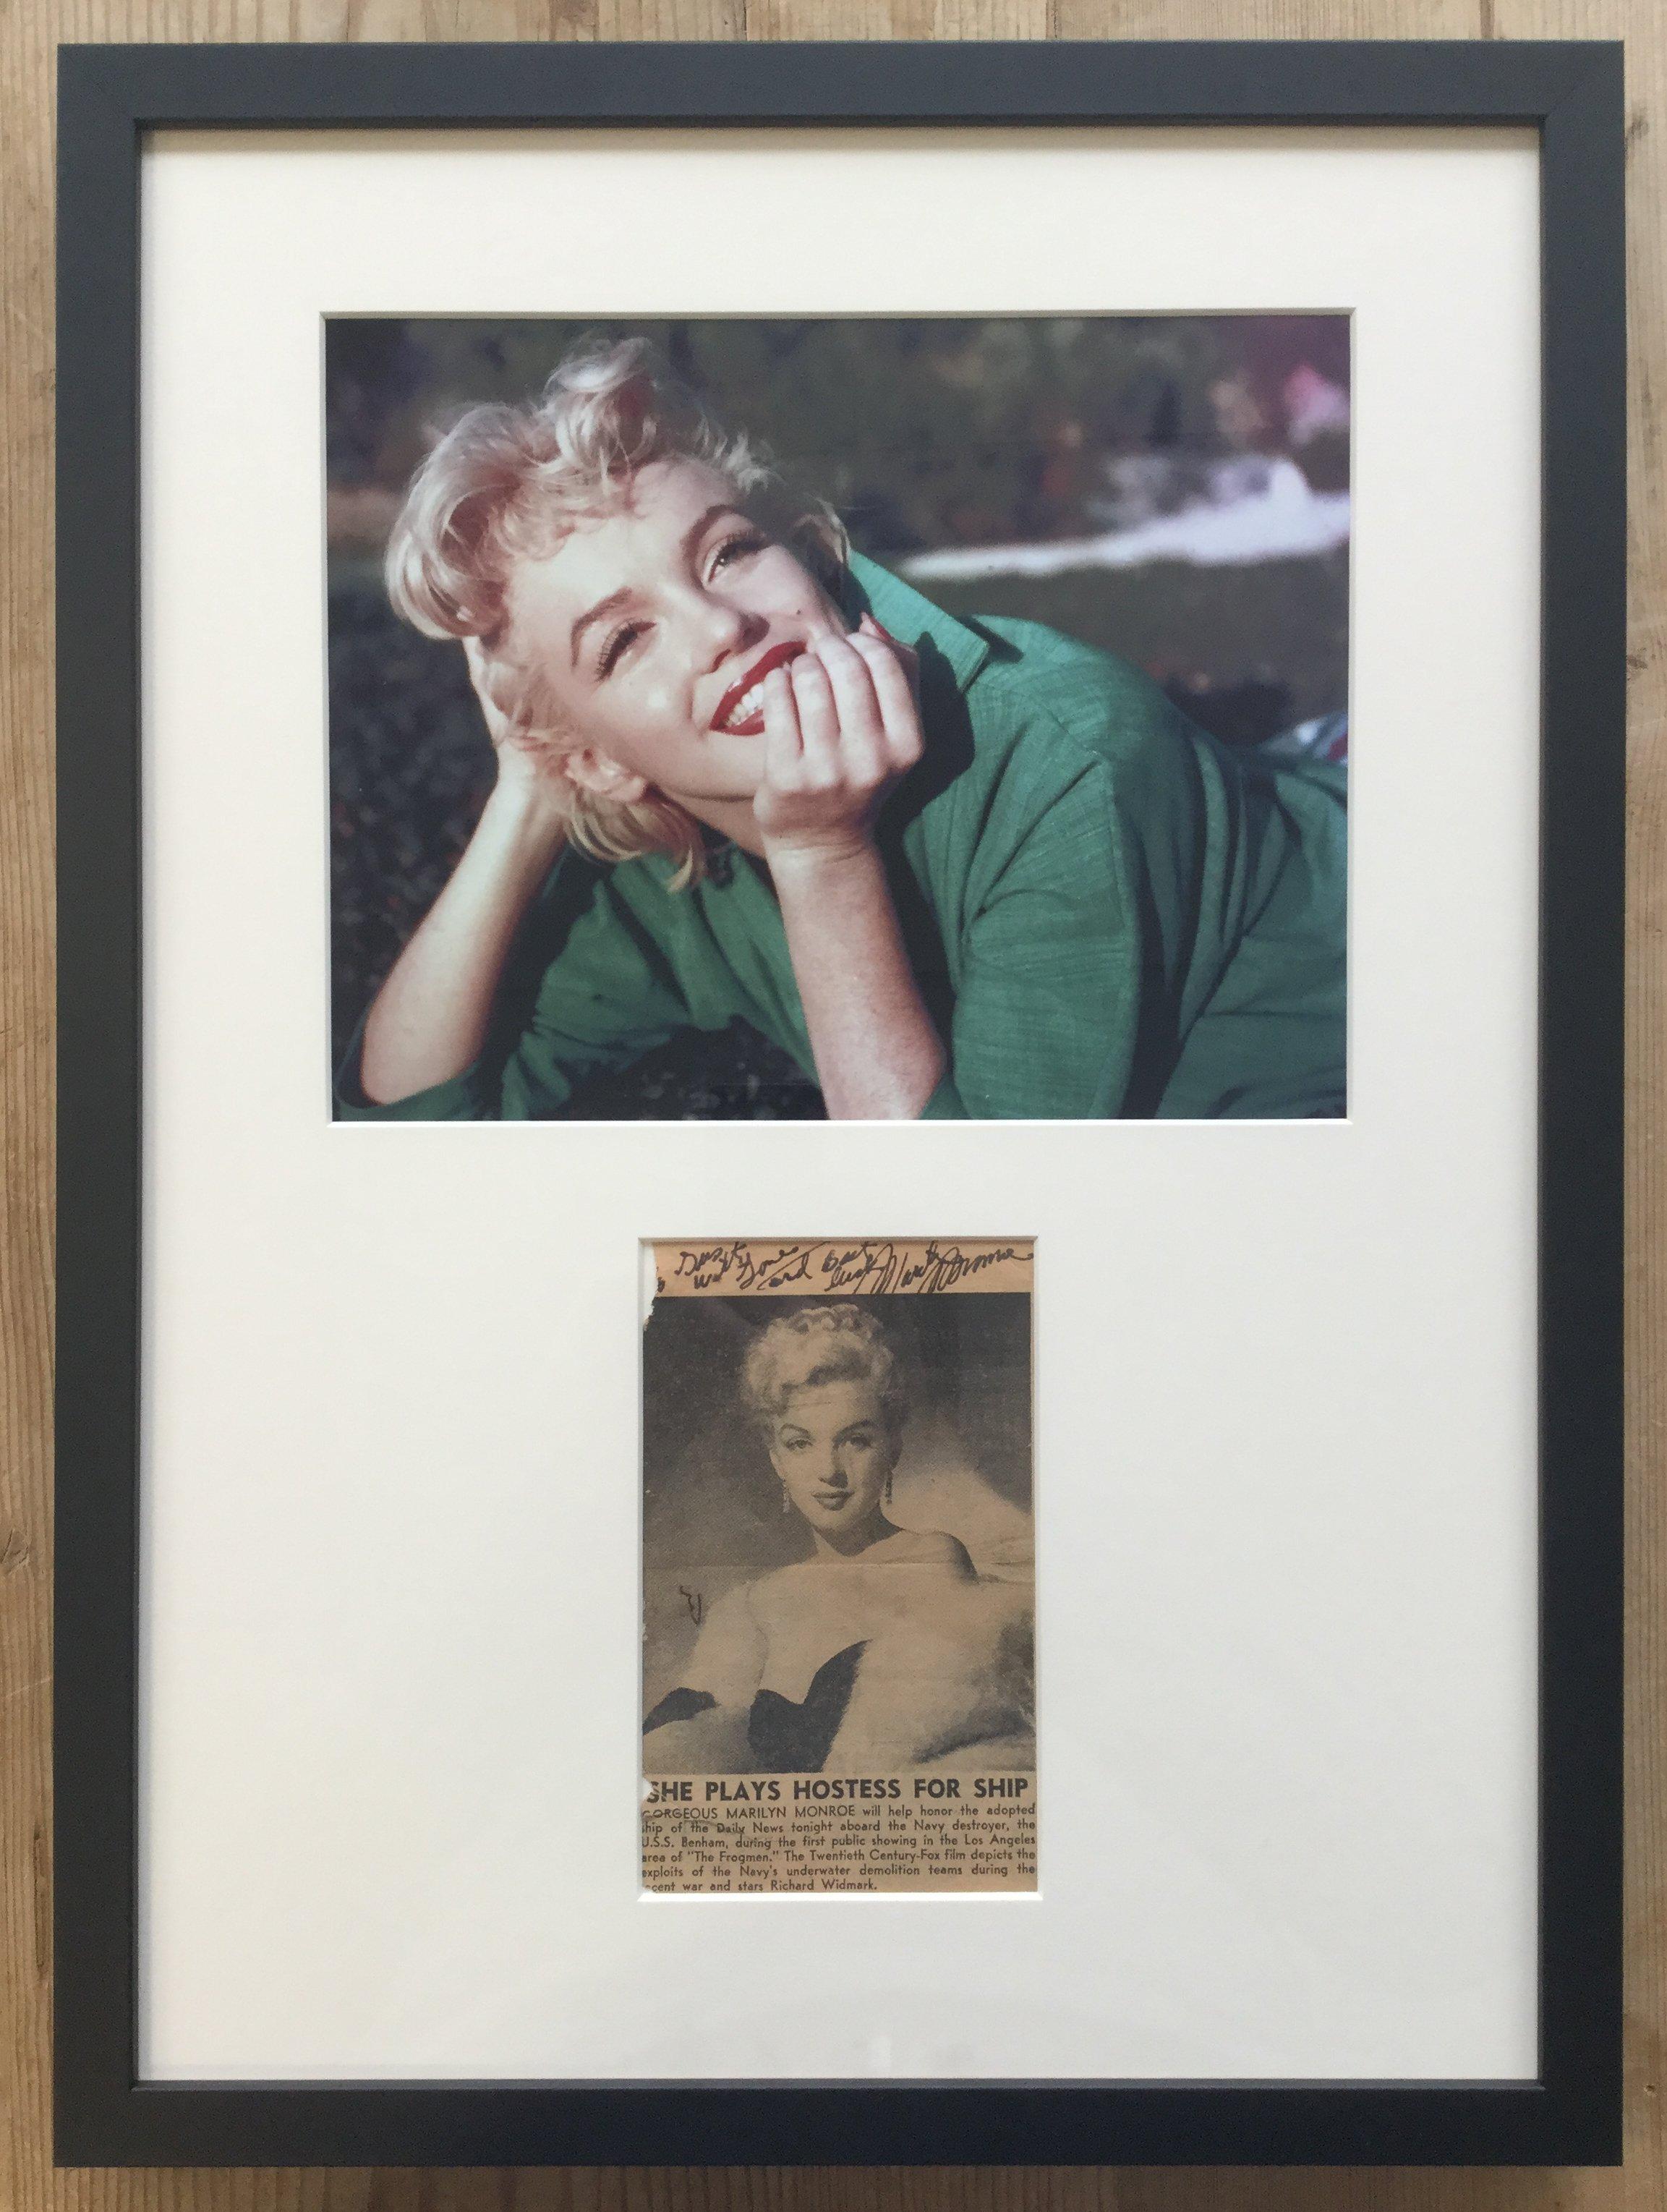 Marilyn Monroe autograph on newspaper clipping

Signed on June 19, 1951 for a US Navy serviceman - superb provenance

Attractively framed using UV-filtering conservation-grade glass

Marilyn Monroe (1926-1962) needs little introduction. An